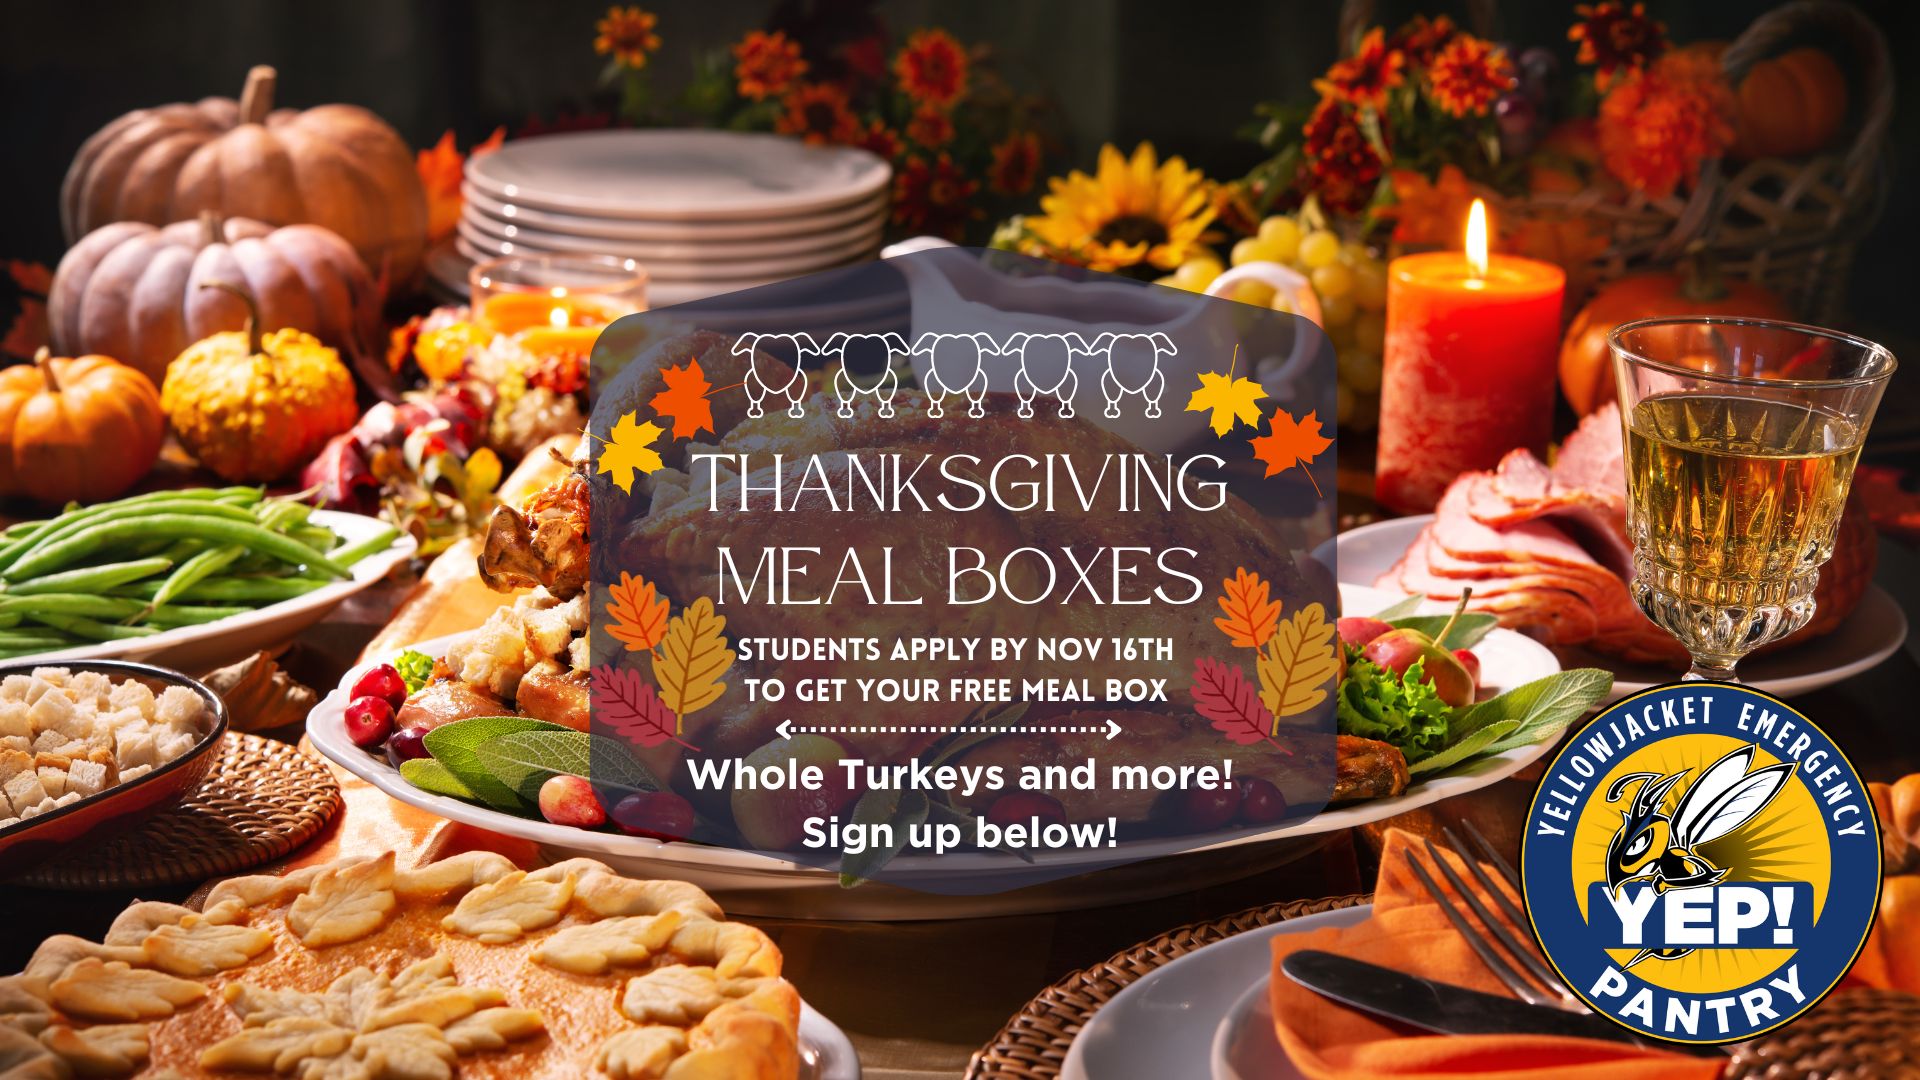 Thanksgiving Meal Boxes, Students Apply by Nov 16th to get your free meal box, whole turkeys and more sign up below!